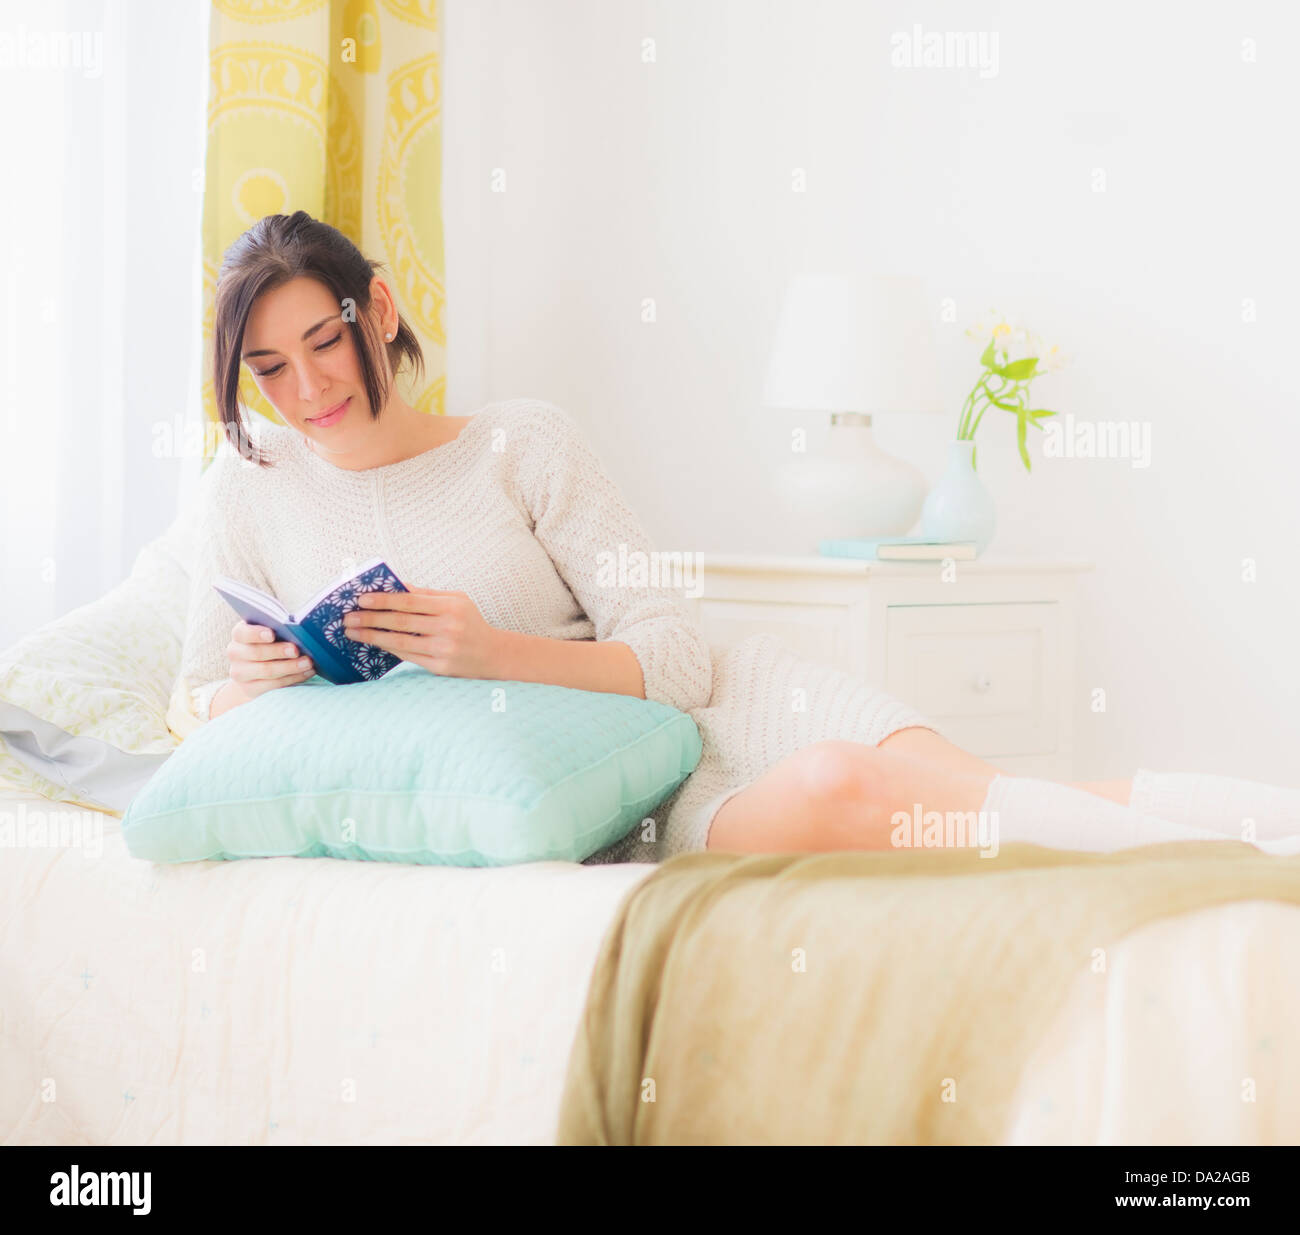 https://c8.alamy.com/comp/DA2AGB/woman-leaning-against-pillow-in-bed-and-reading-book-DA2AGB.jpg